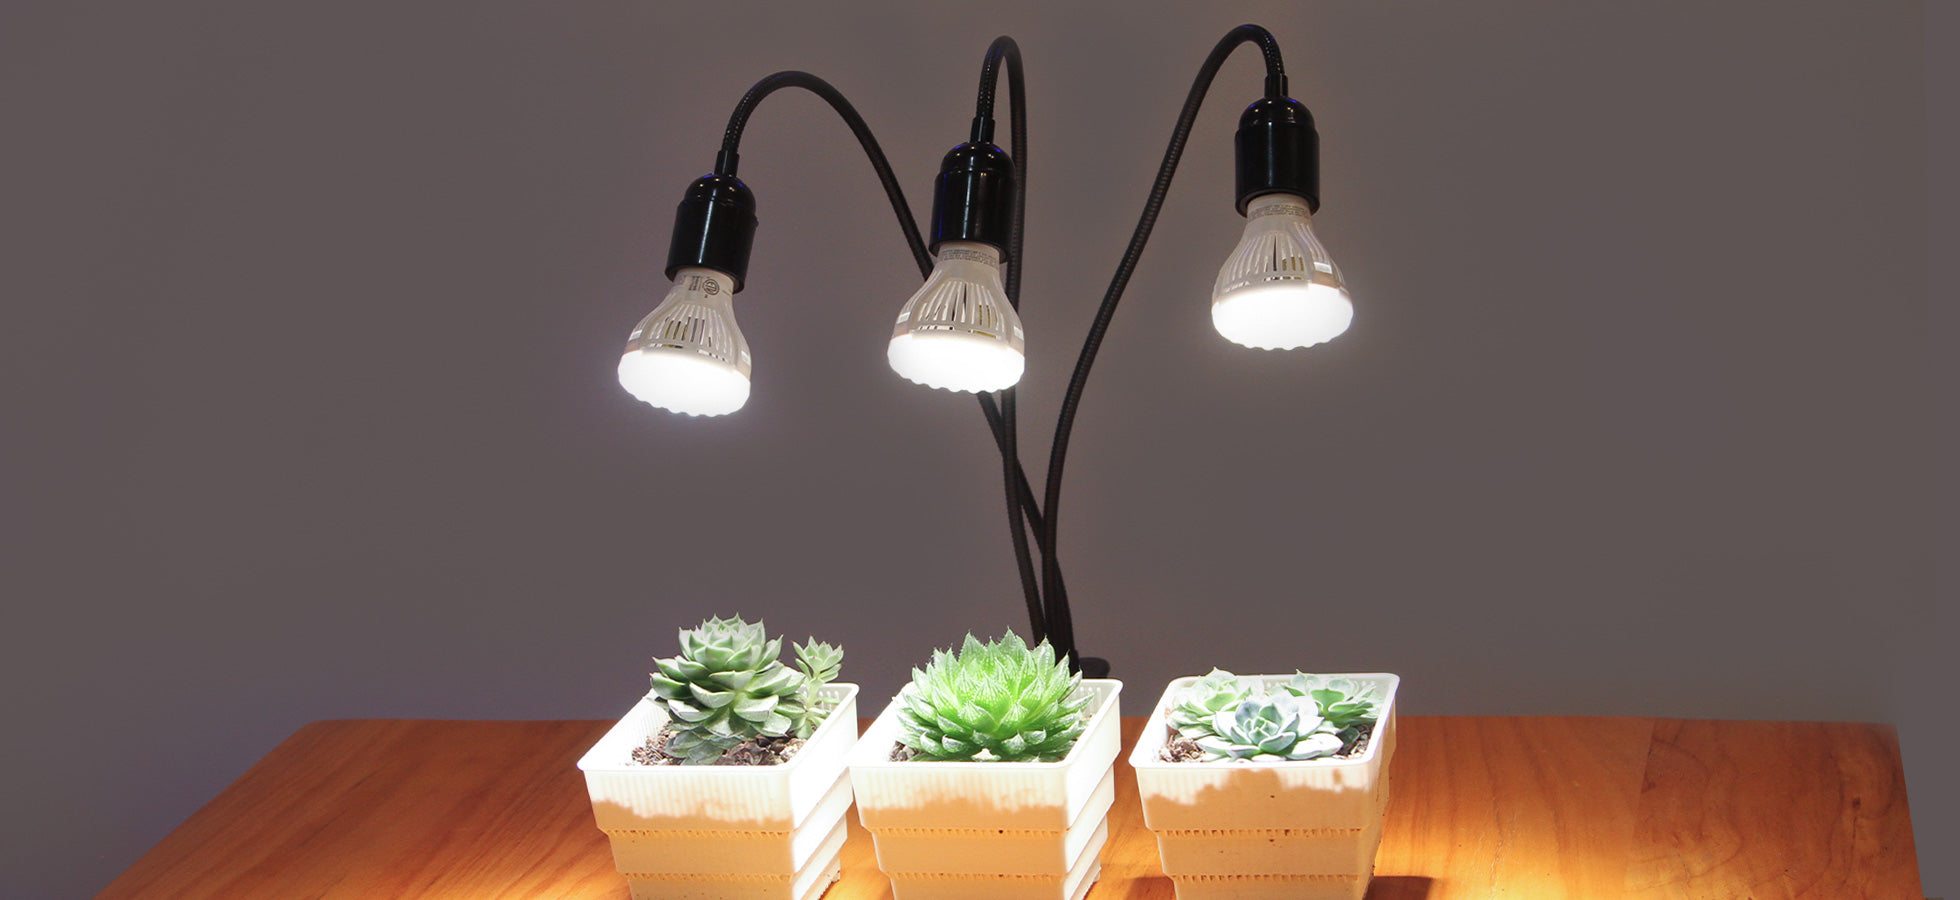 30W Adjustable 3-Head Clip-on LED Grow Light is clipped on the table, the light of the bulbs is on a pot of succulence, succulence grows healthily under the light of the lamps.